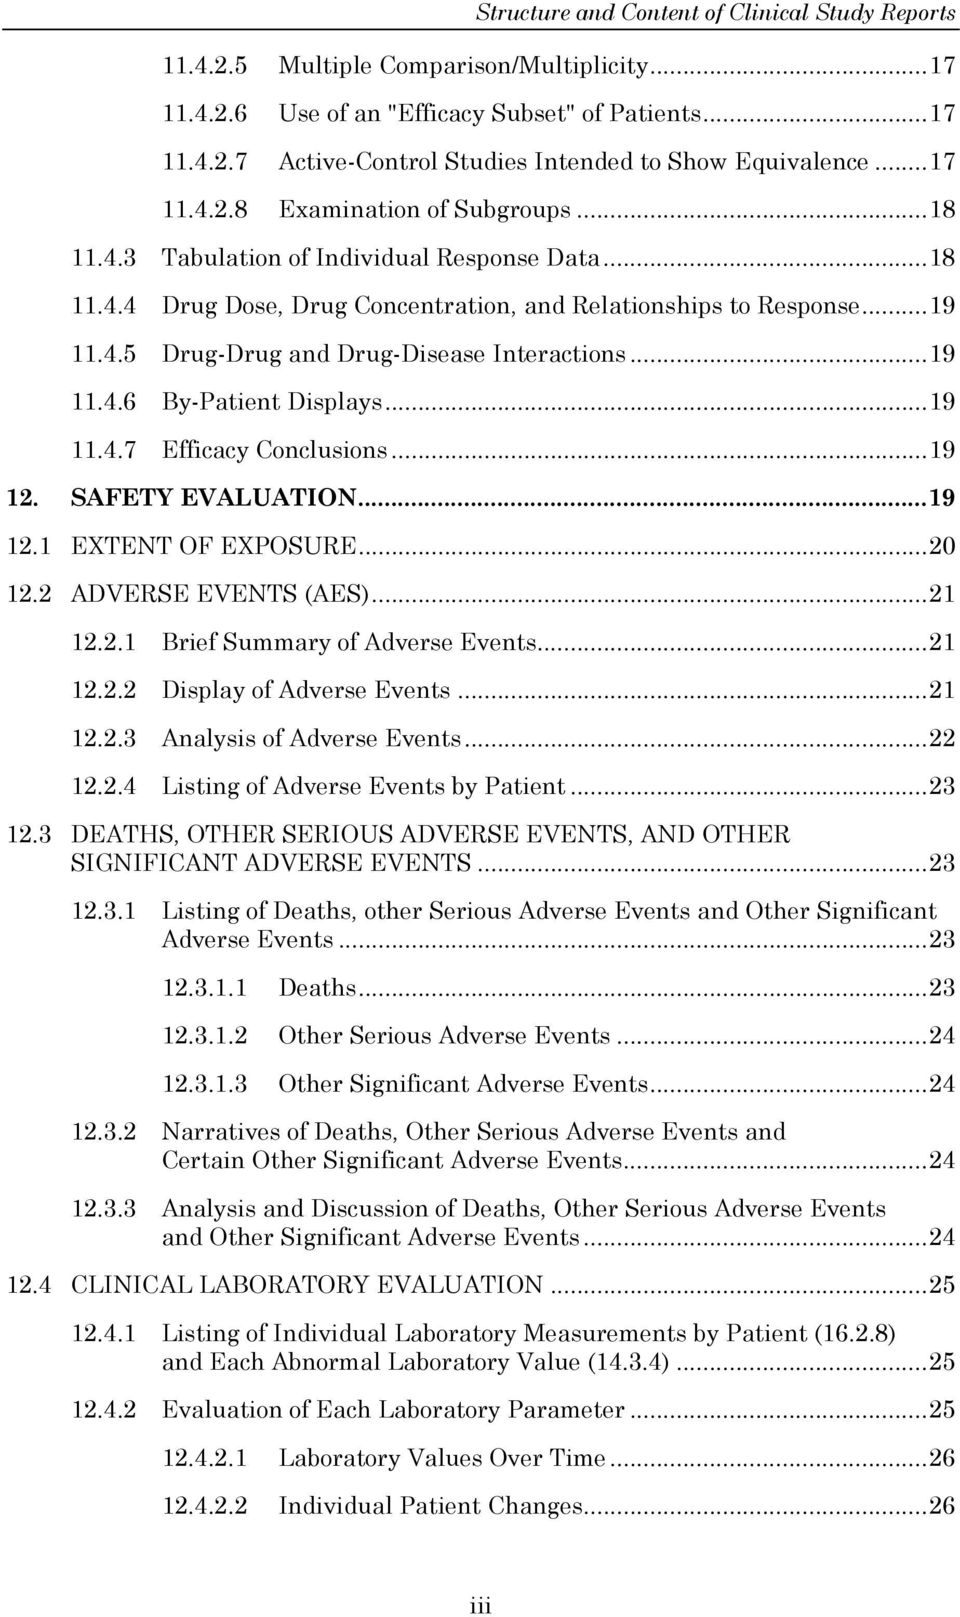 ..19 11.4.7 Efficacy Conclusions...19 12. SAFETY EVALUATION...19 12.1 EXTENT OF EXPOSURE...20 12.2 ADVERSE EVENTS (AES)...21 12.2.1 Brief Summary of Adverse Events...21 12.2.2 Display of Adverse Events.